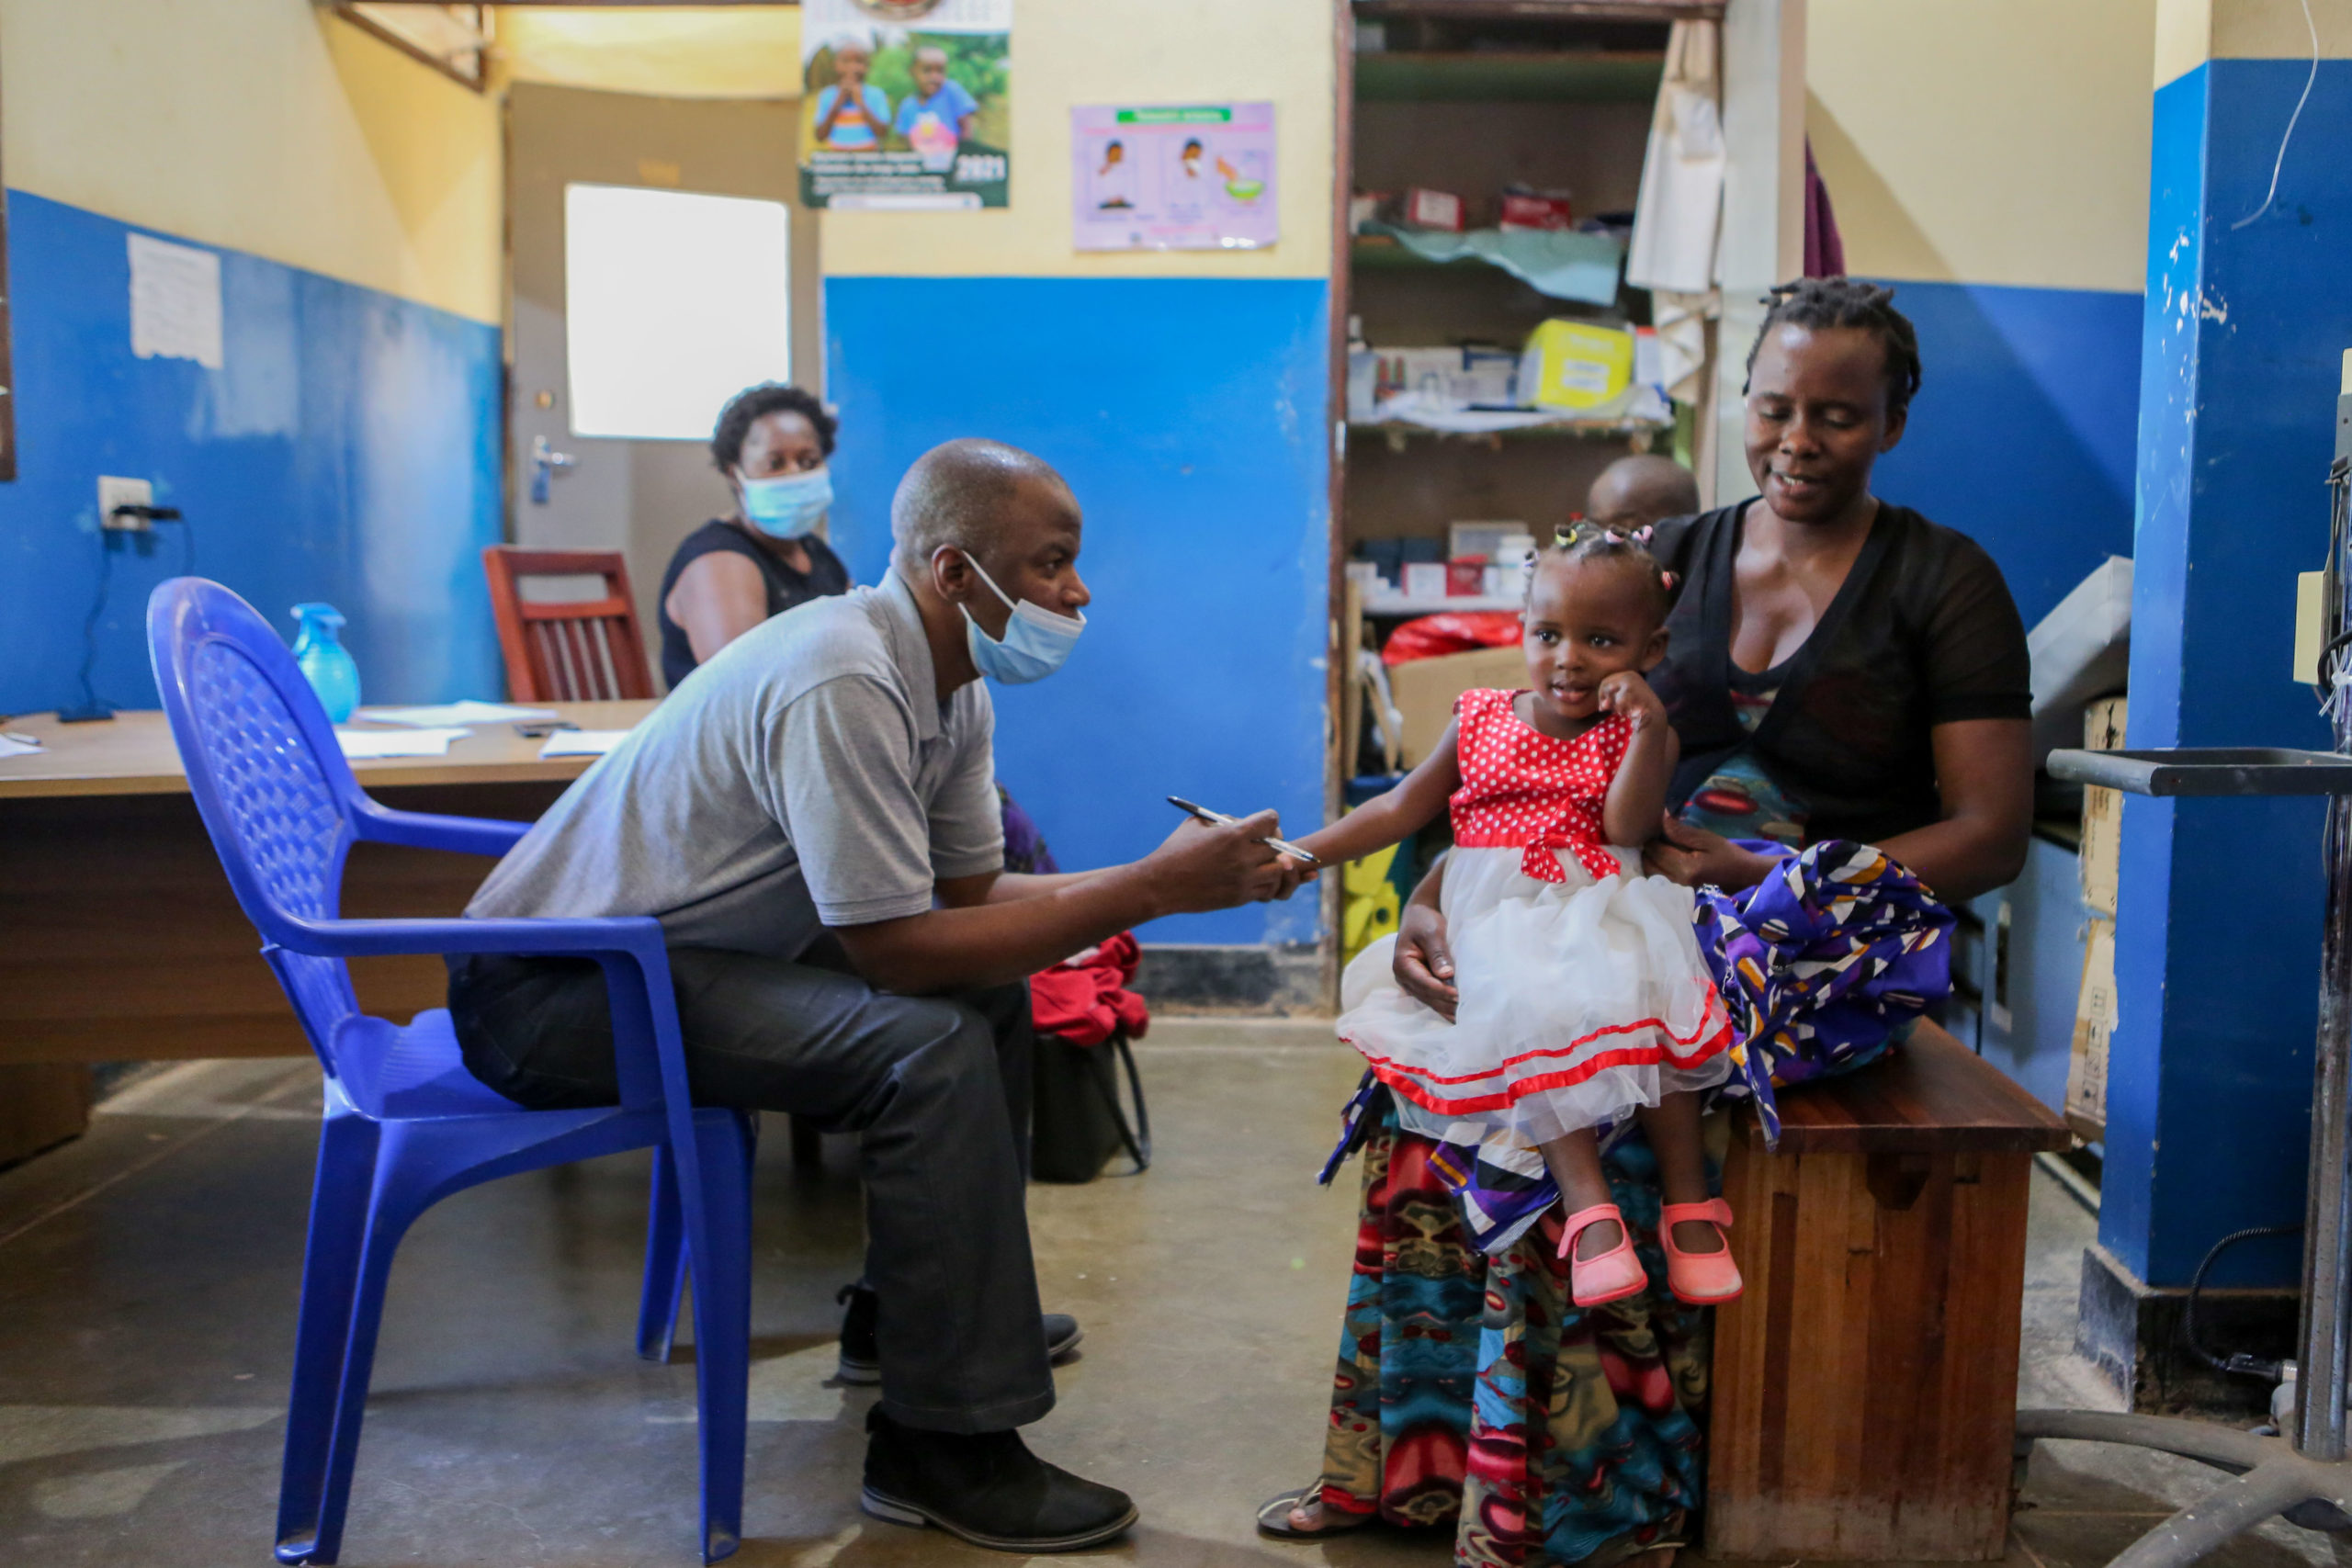 Finding neglected child health conditions with mobile clinics